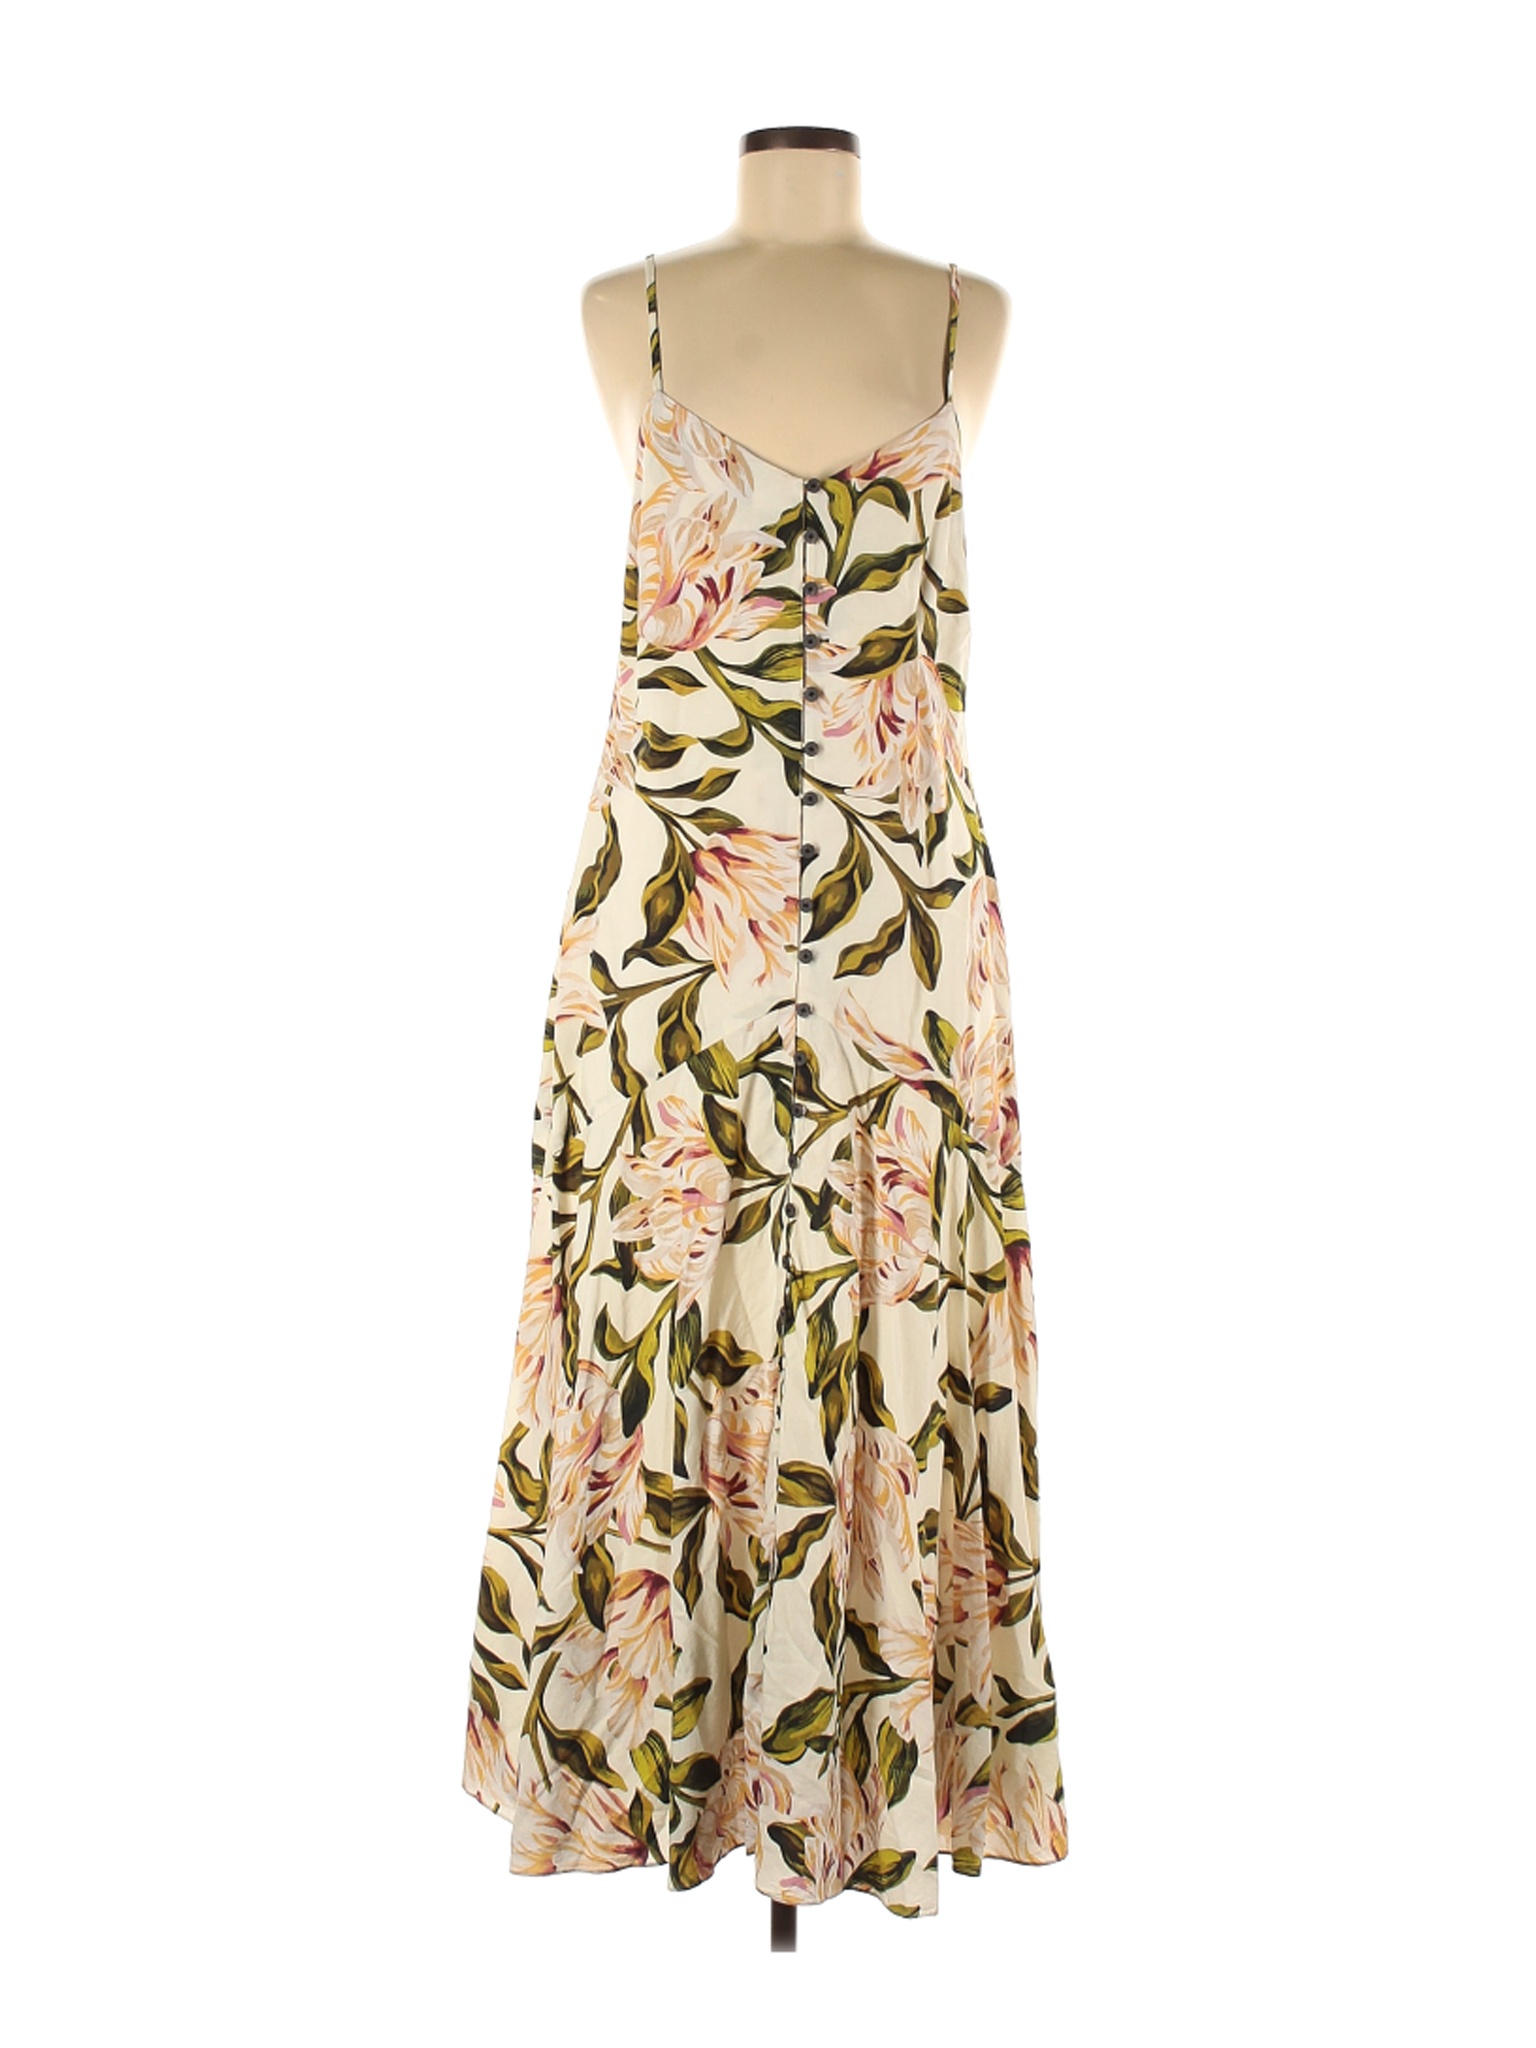 Mara Hoffman Floral Multi Color Ivory Casual Dress Size M - 42% off ...